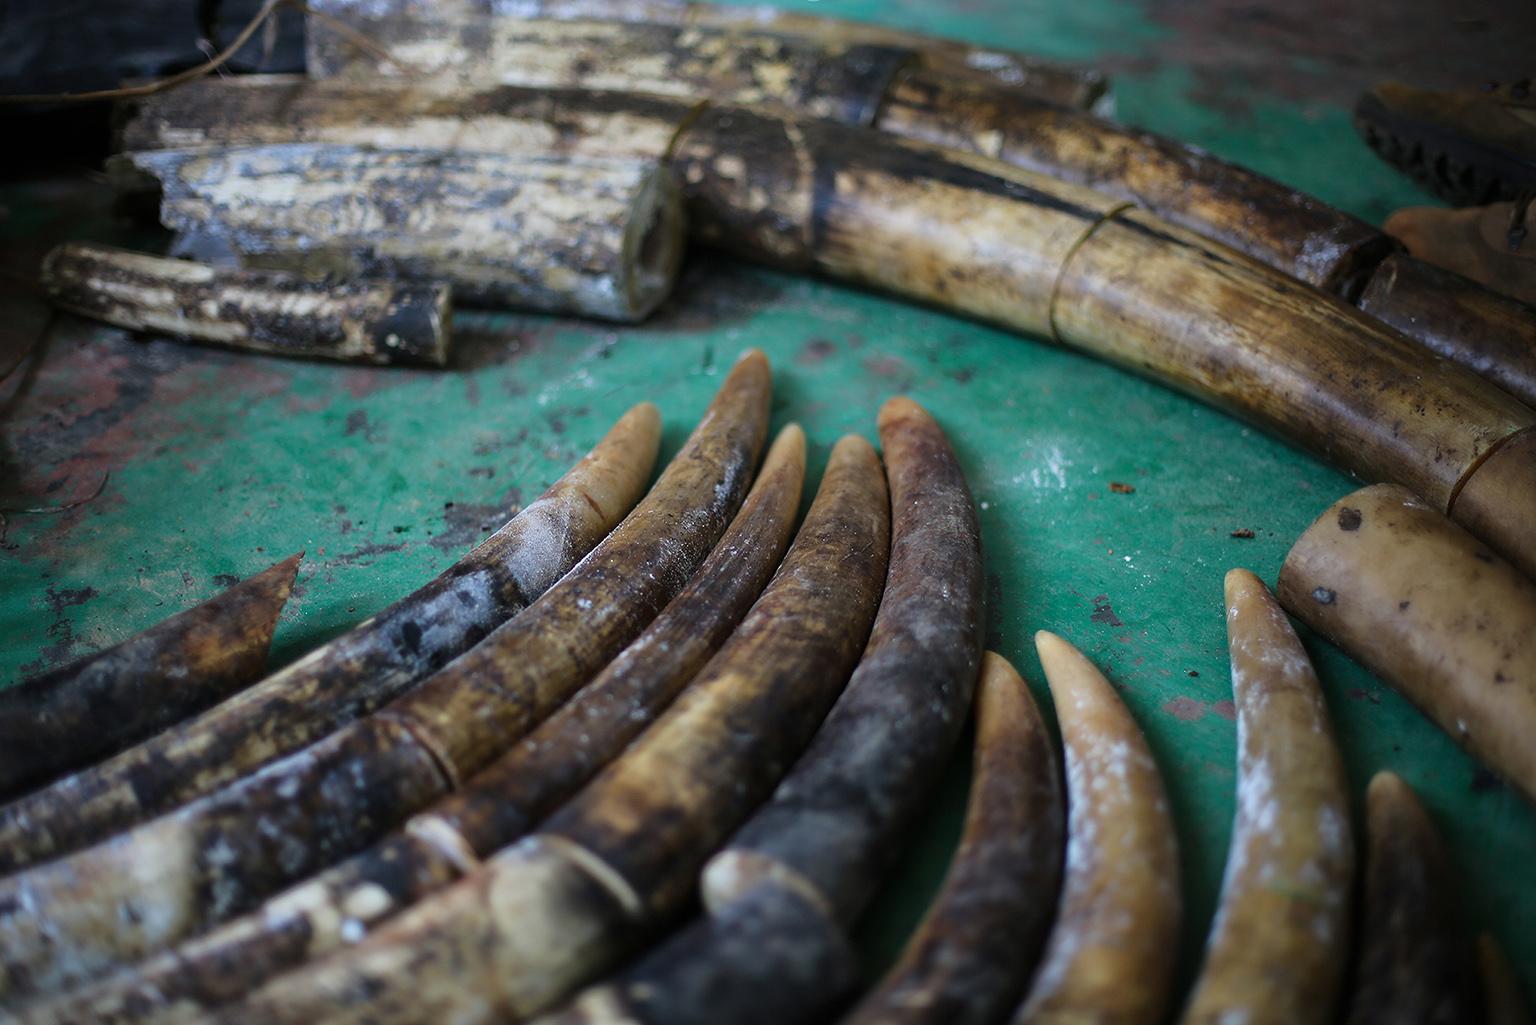 Ivory seized Feb. 2, 2018 from poachers convicted of killing 11 elephants in and around Nouabale-Ndoki National Park in the Republic of Congo. (Z. Labuschagne / Wildlife Conservation Society)